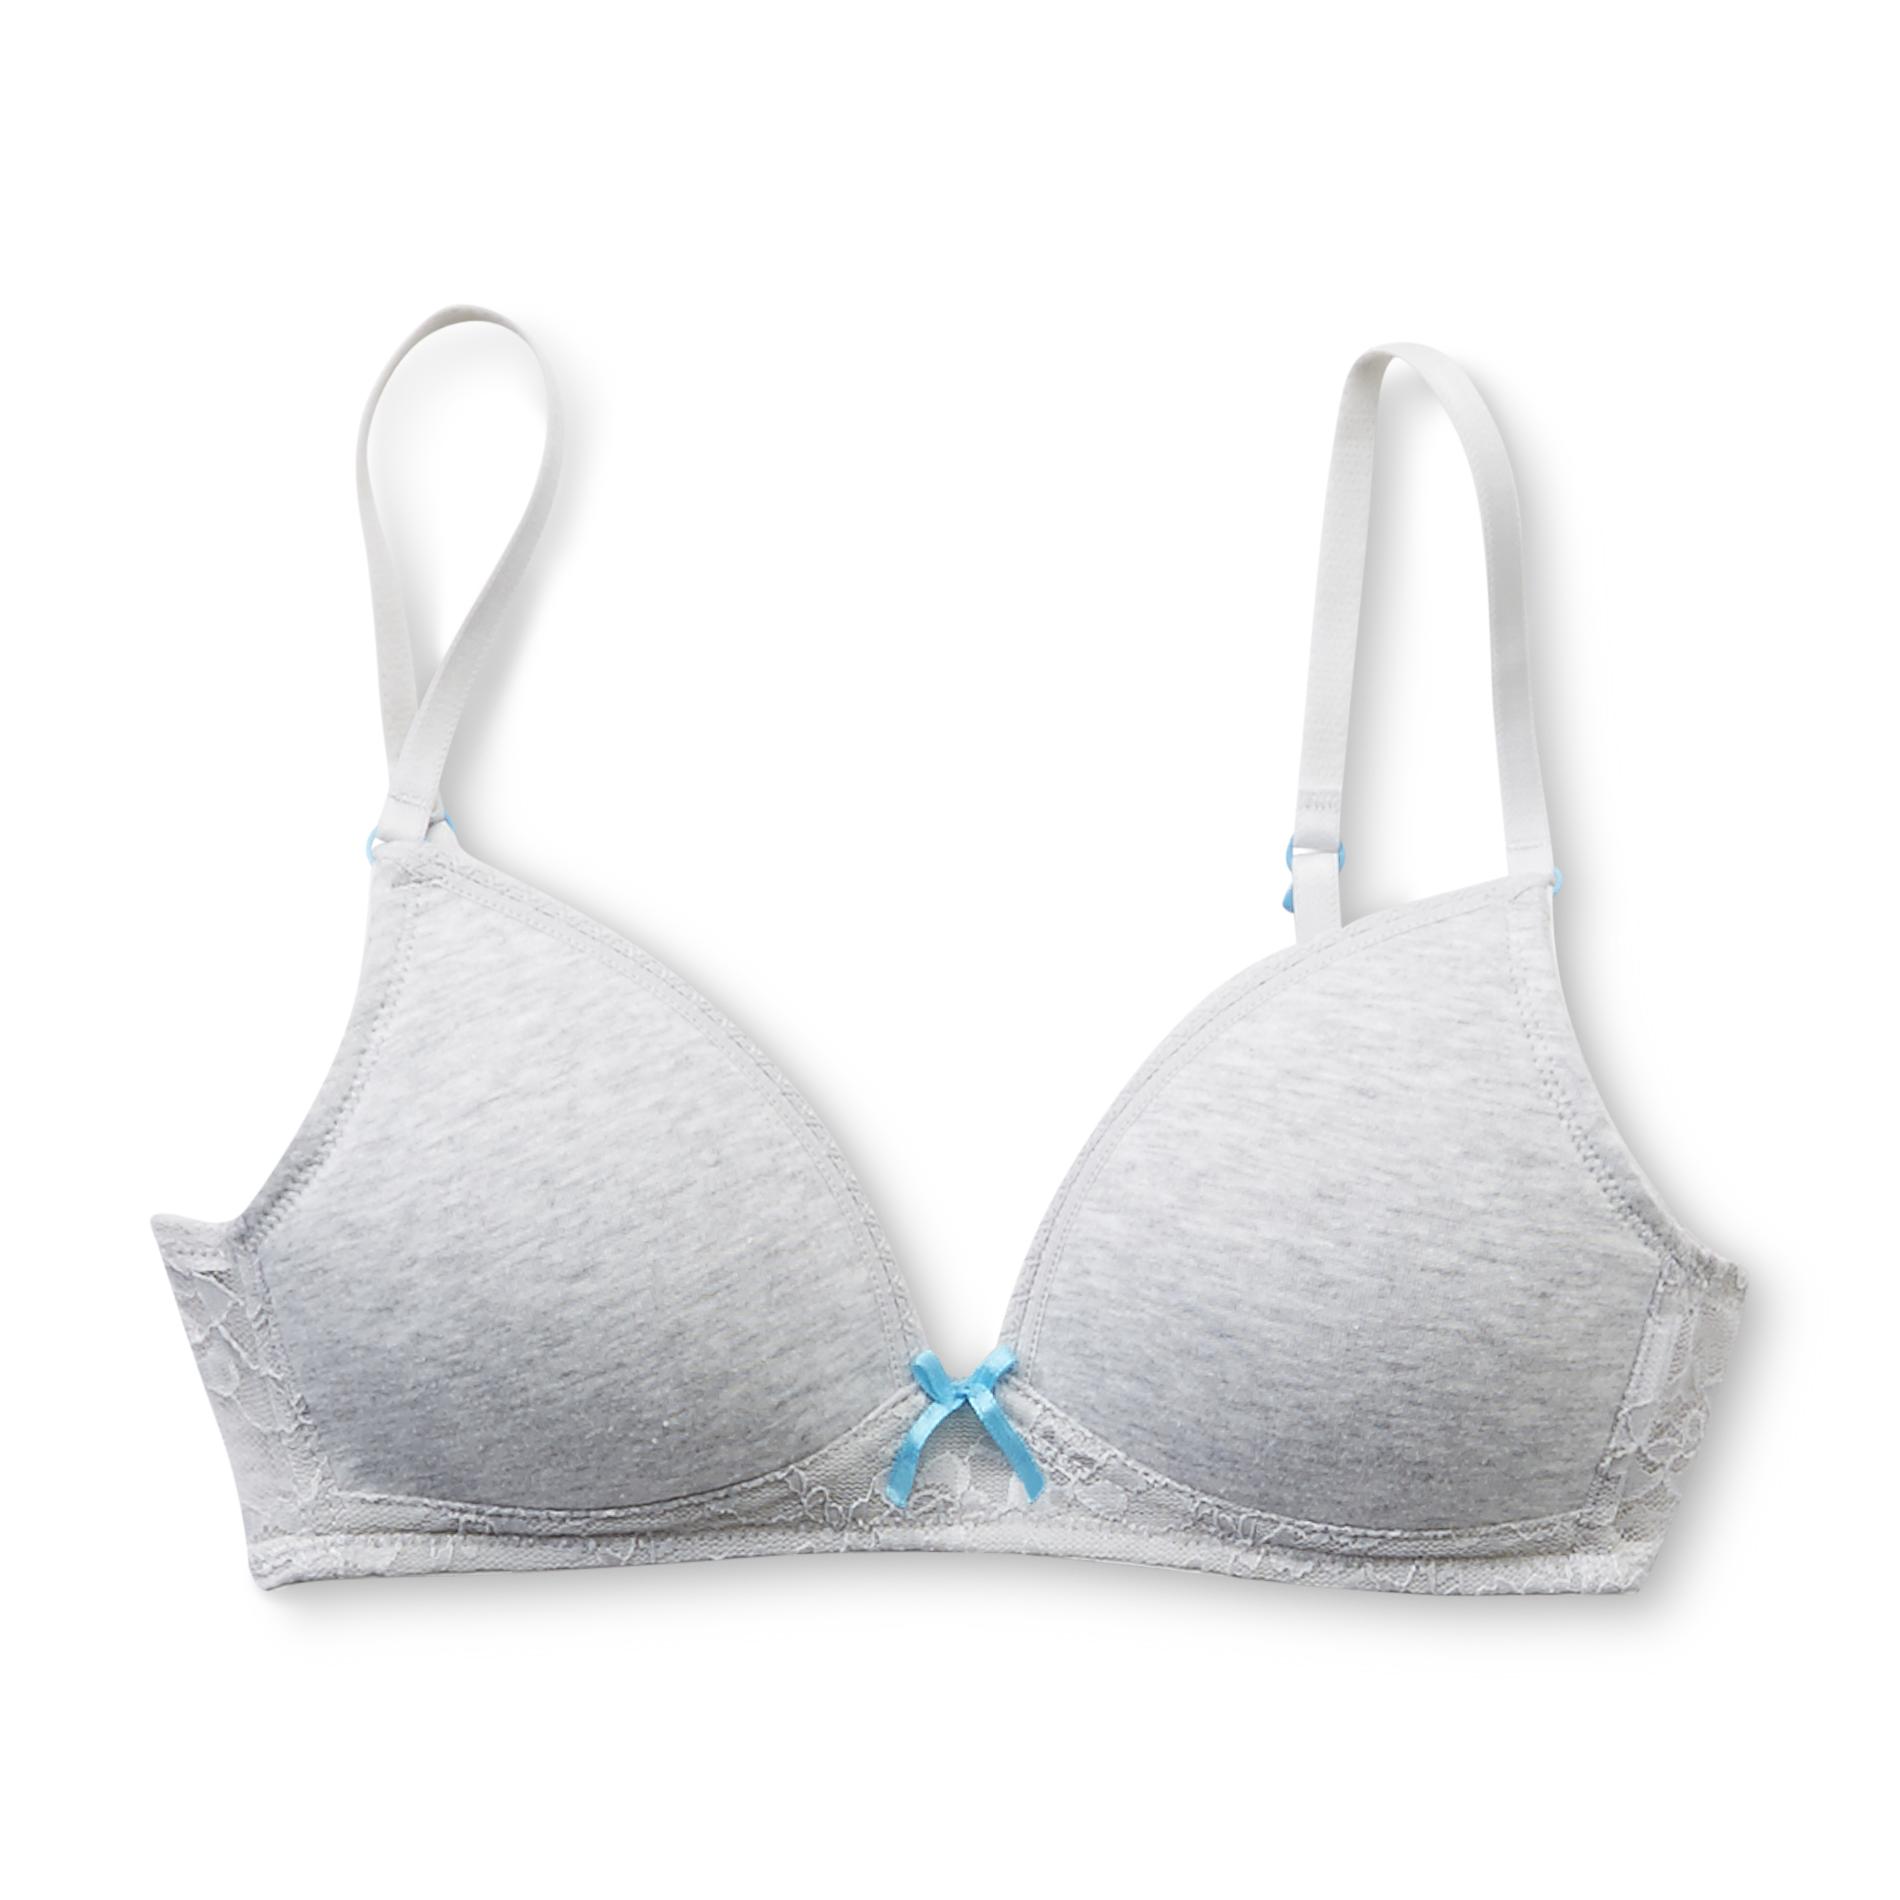 Maidenform Girl's Molded Cup Bra - Heathered